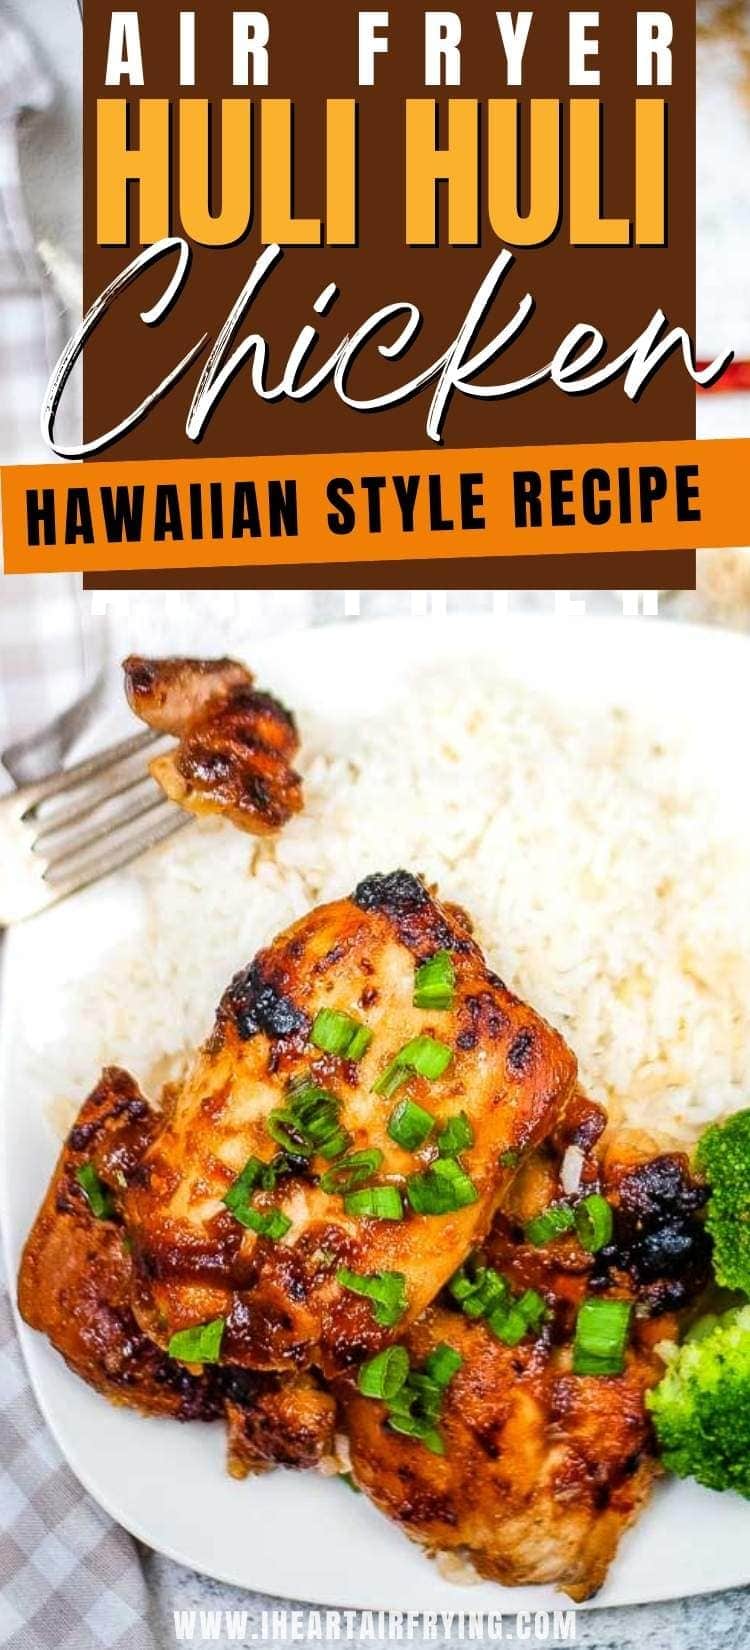 Air fryer Huli Huli chicken on a plate with rice and broccoli with text overlay.